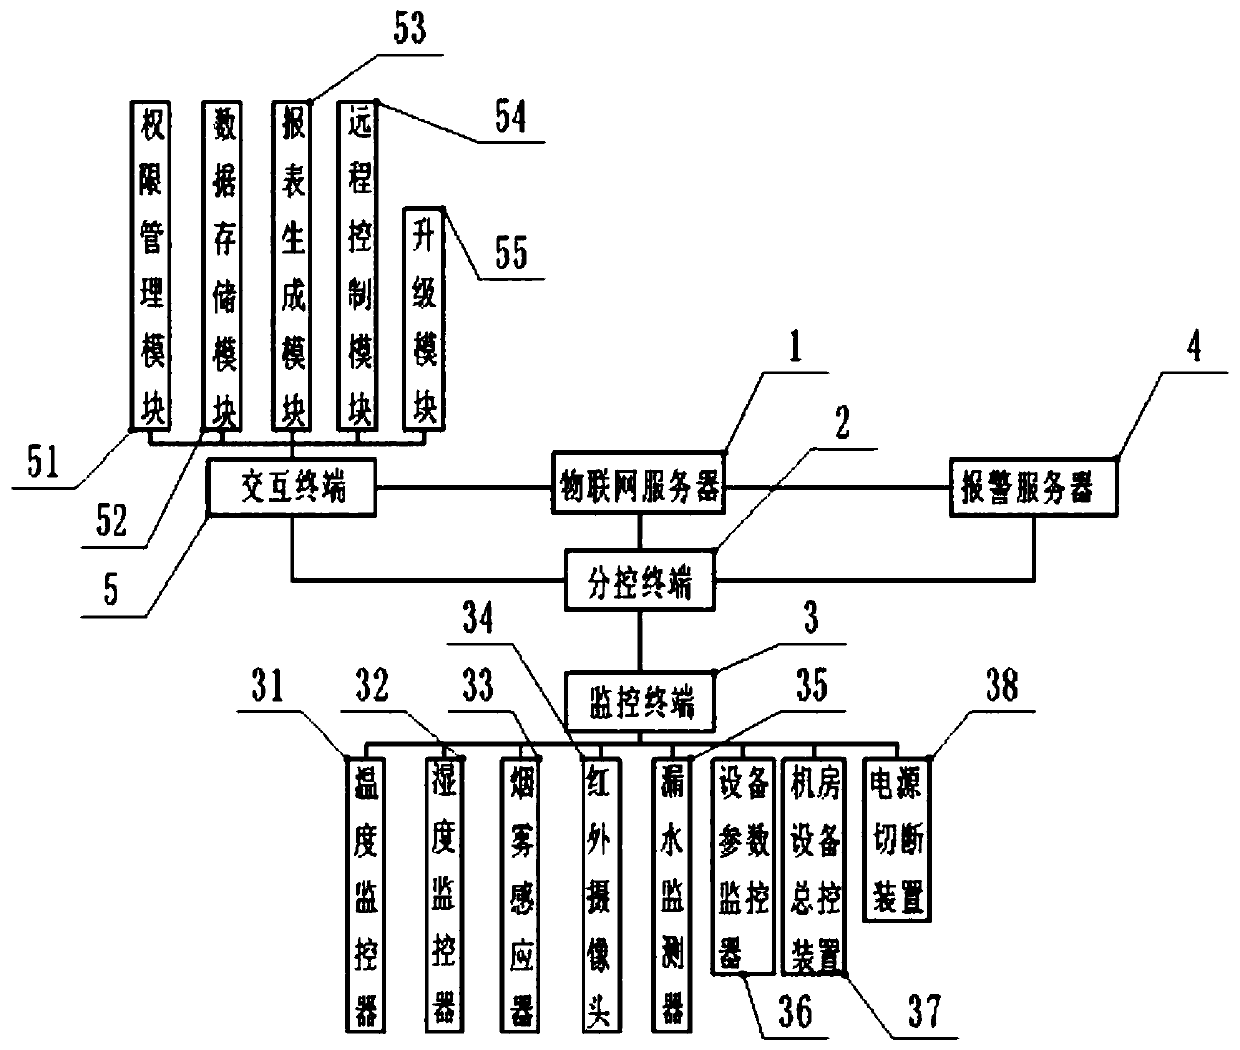 Remote electrical equipment monitoring method based on composite Internet of Things